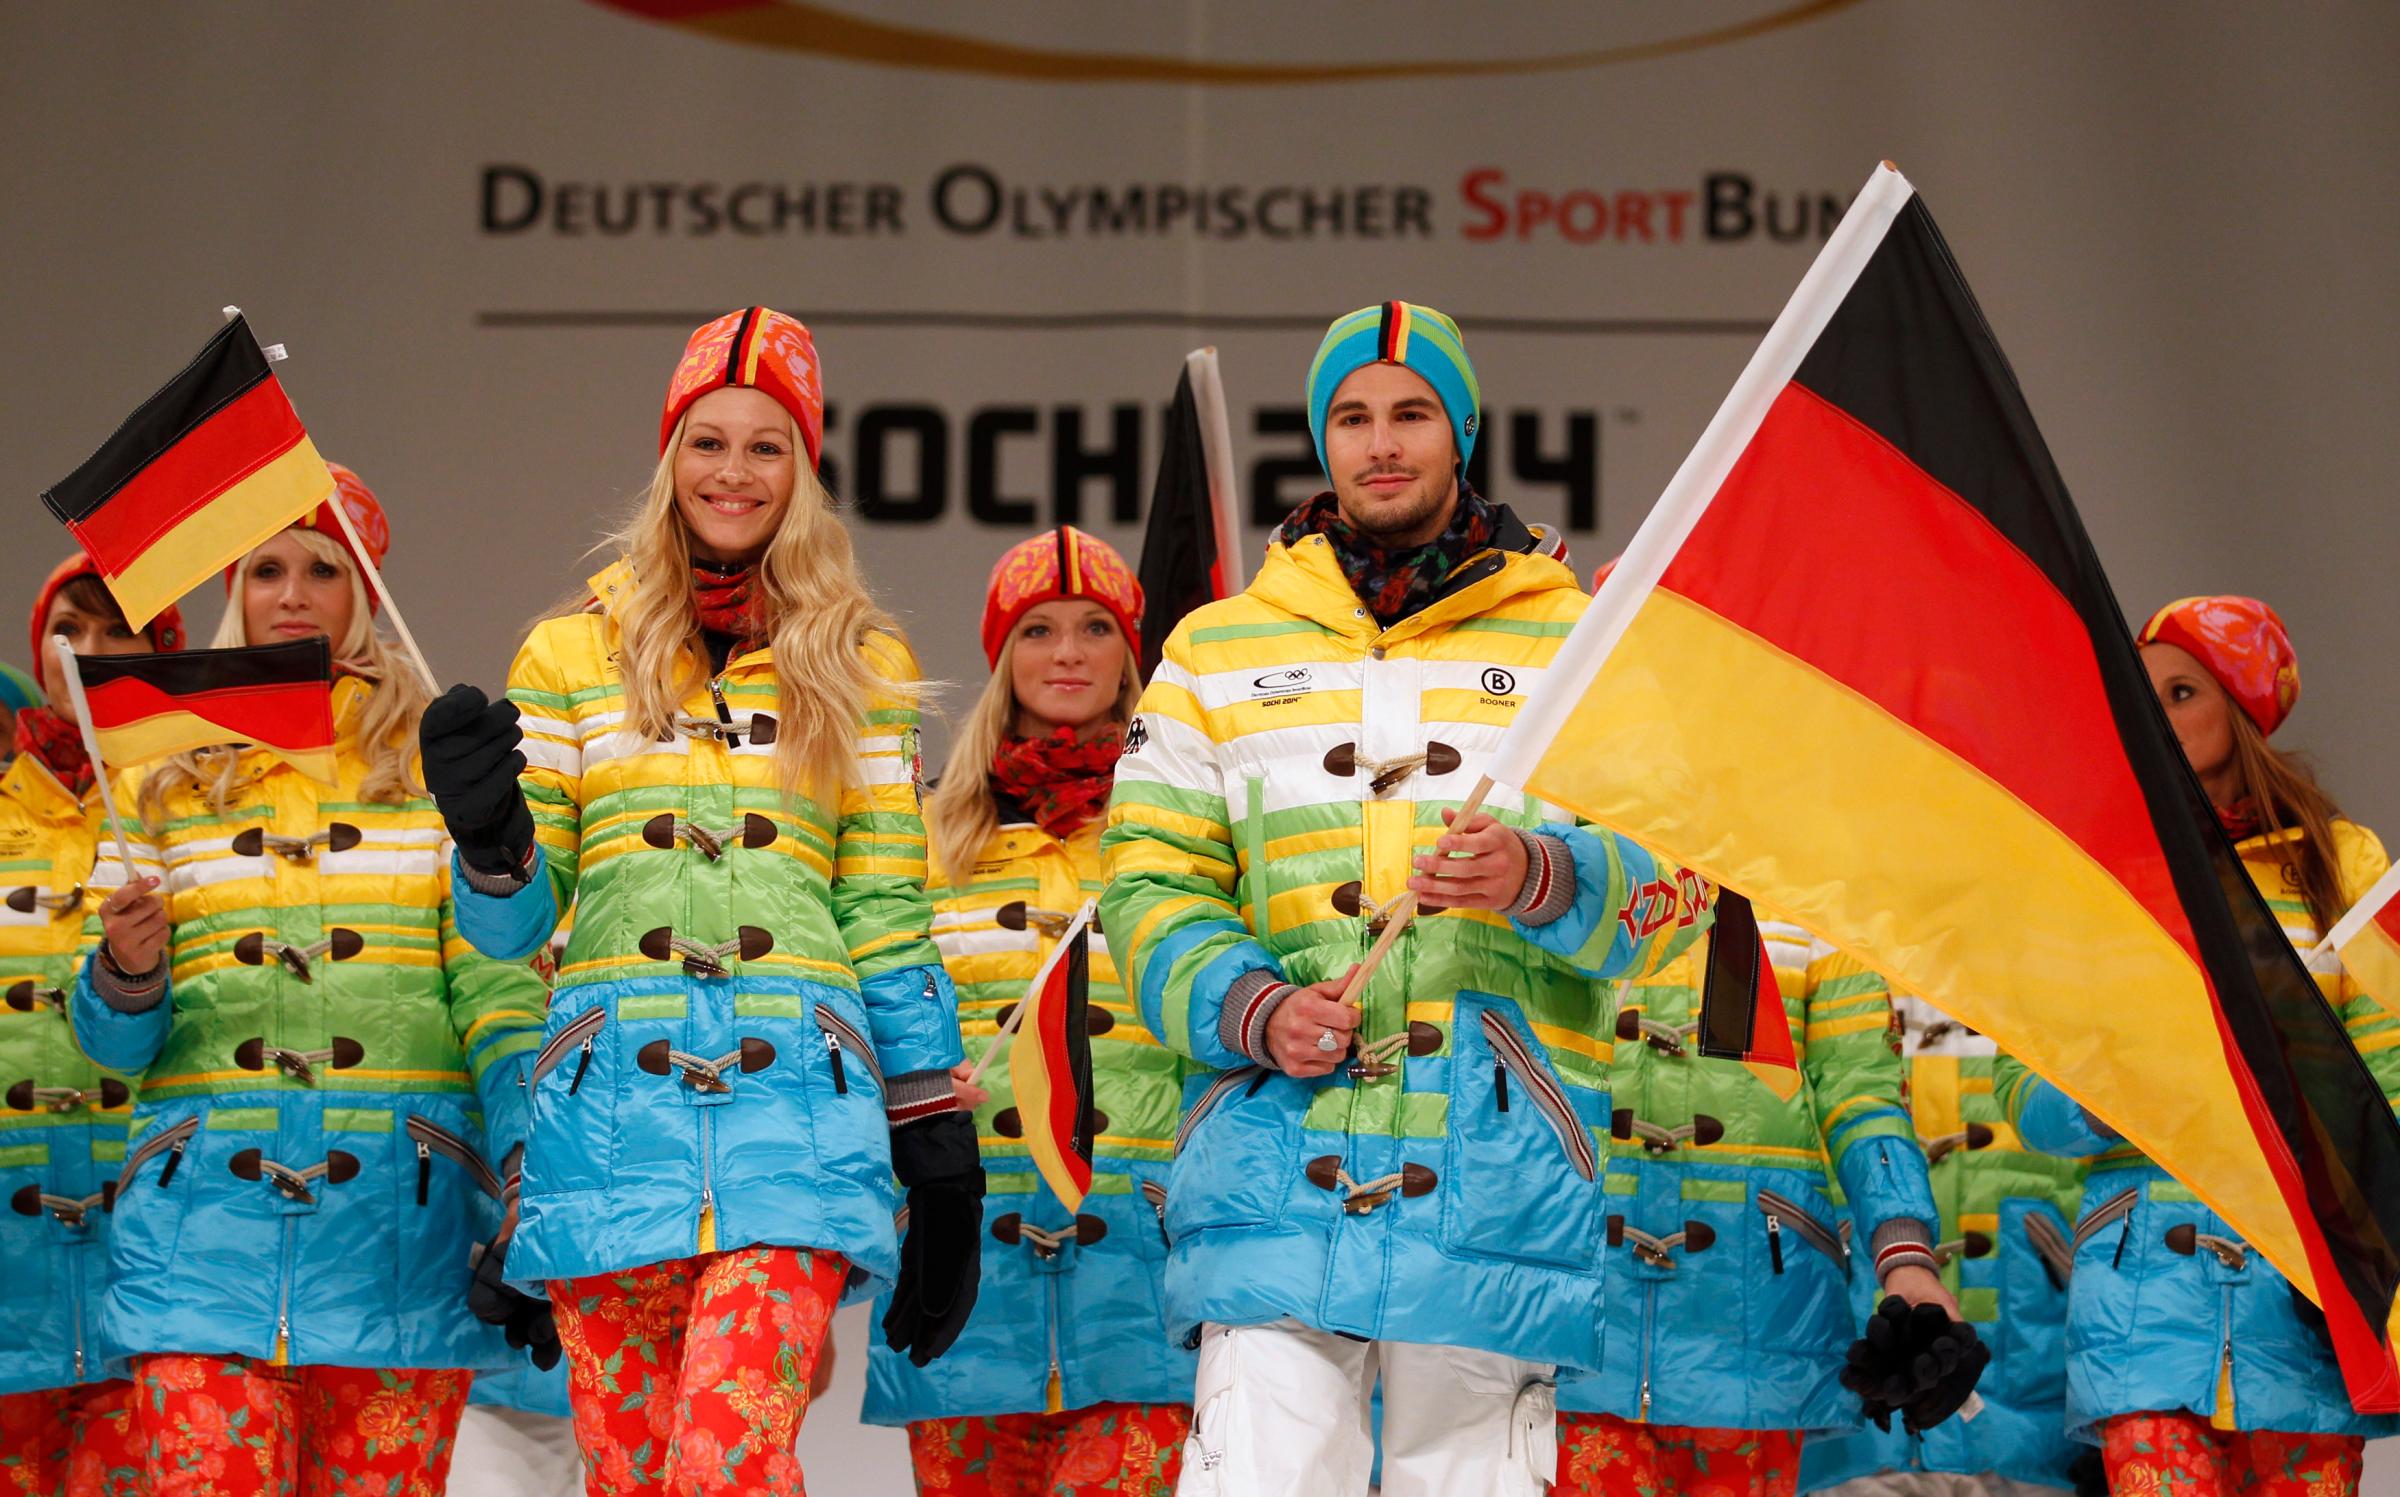 German athletes are sure to stand out with these multi-colored duffle coats.